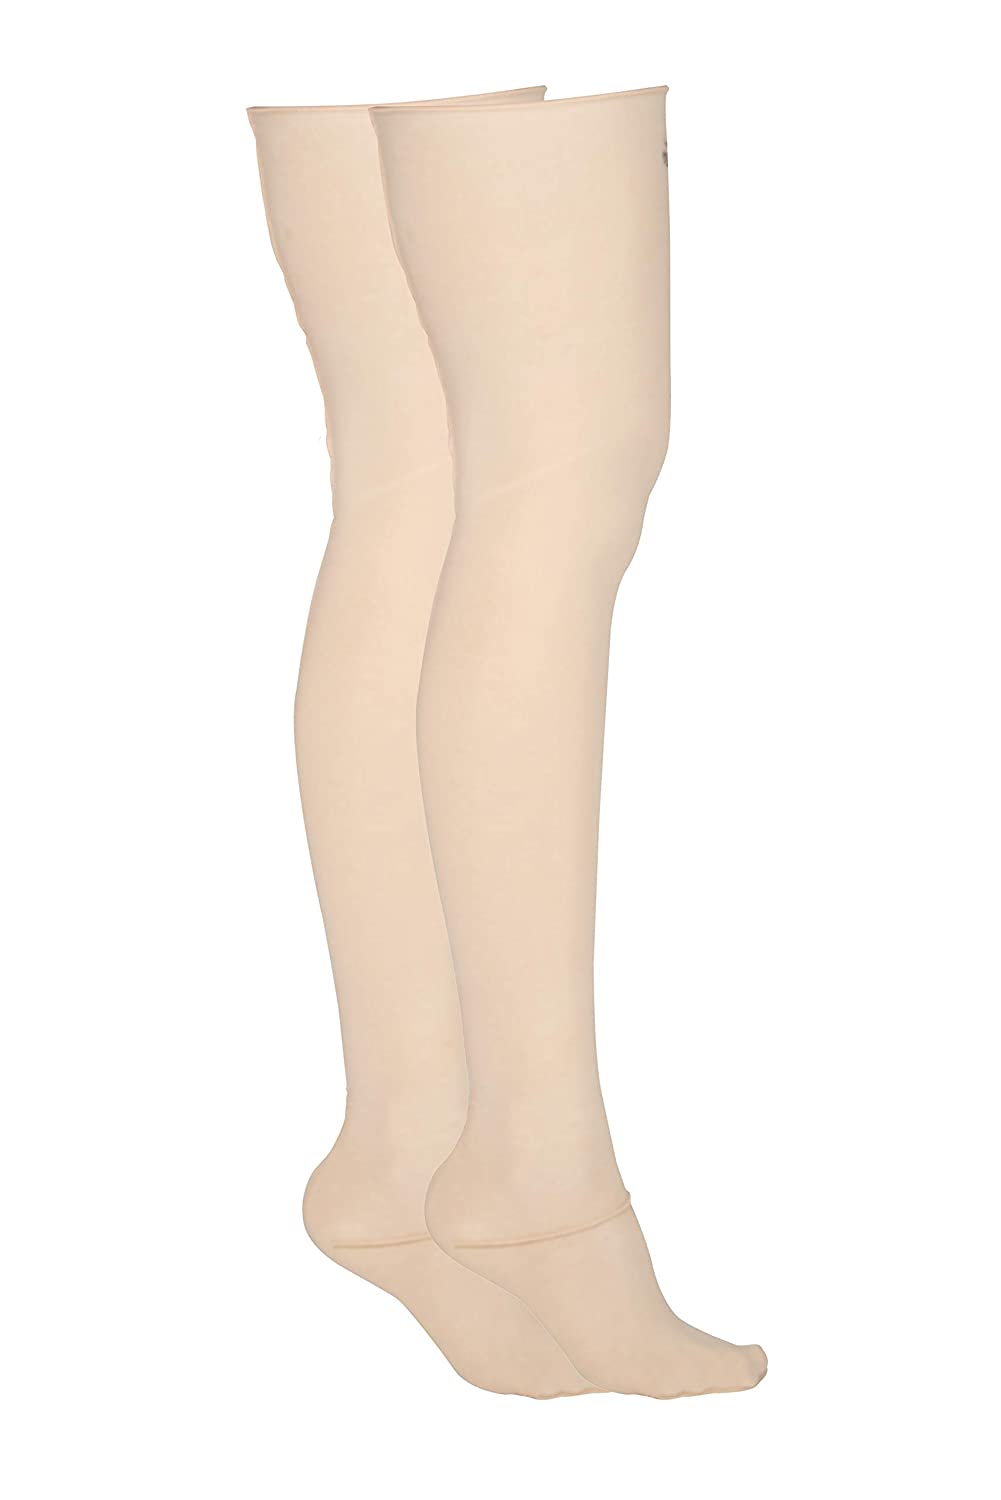 AHS Graduated 20-30 mmHg Compression Stocking for Men and Women-4